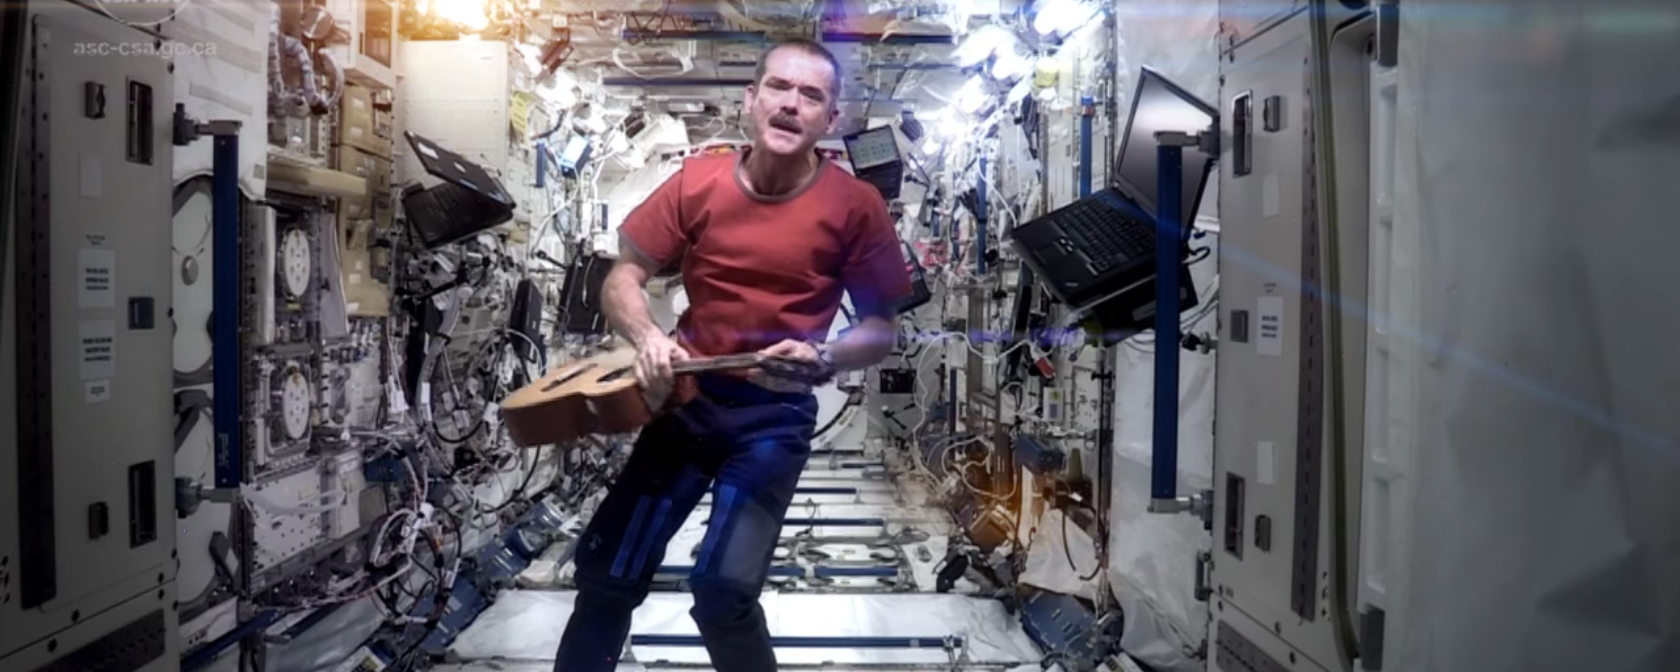 Astronaut Chris Hadfield holds a guitar while floating on the ISS.